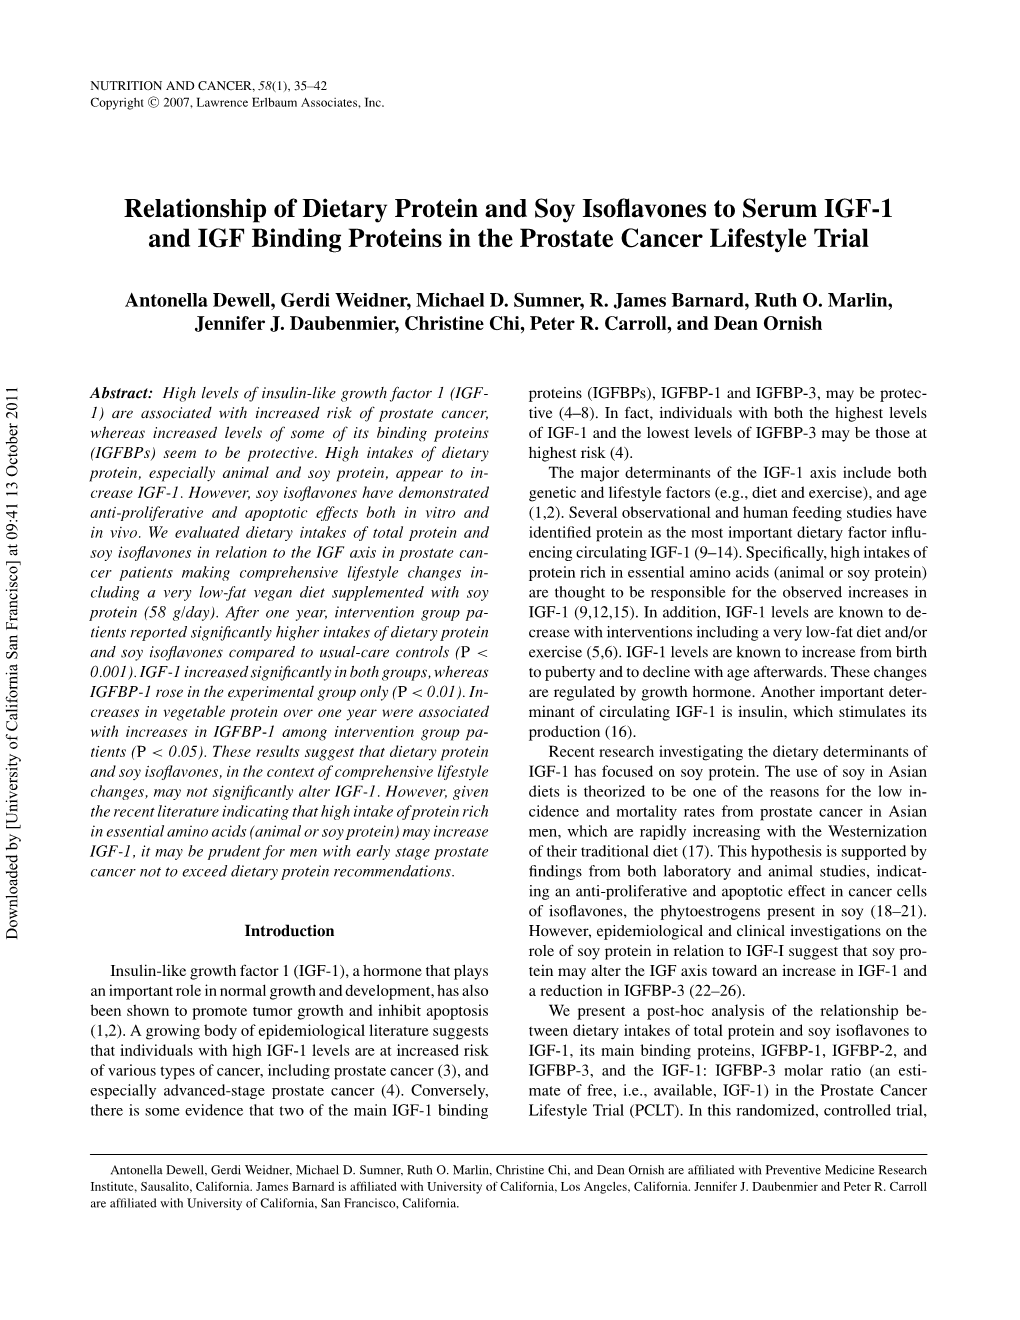 Relationship of Dietary Protein and Soy Isoflavones to Serum IGF-1 And